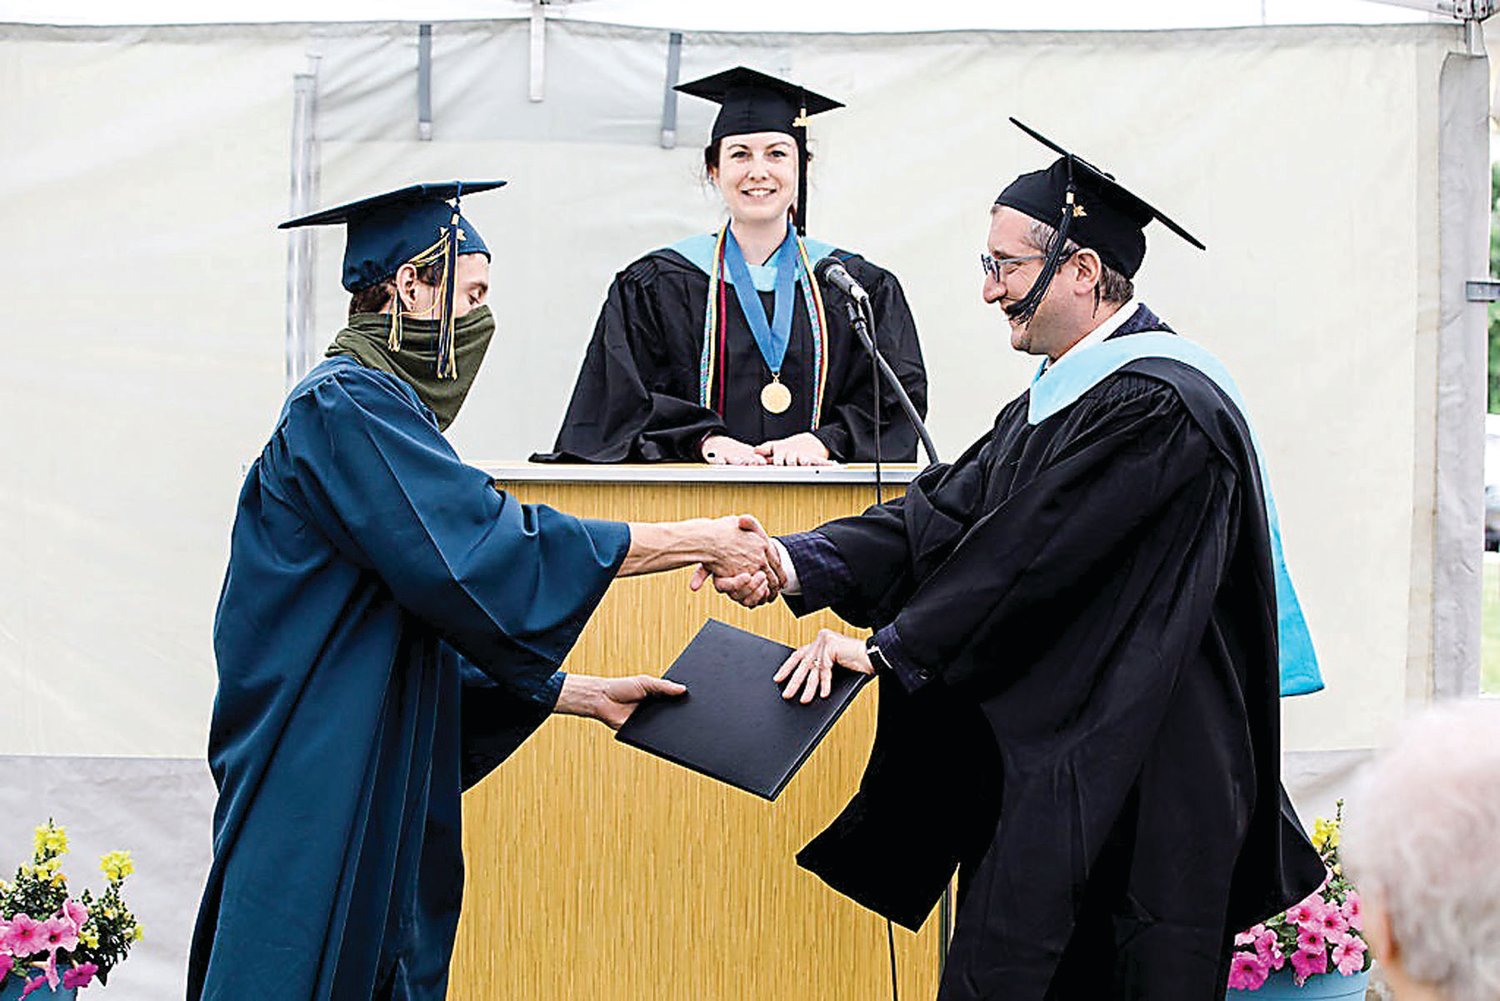 The first high school graduate of The Quaker School at Horsham, Sam Gerhart, shakes hands and receives his high school diploma from Alex Brosowsky, head of school, and Nicole Schwartz, Upper School director.